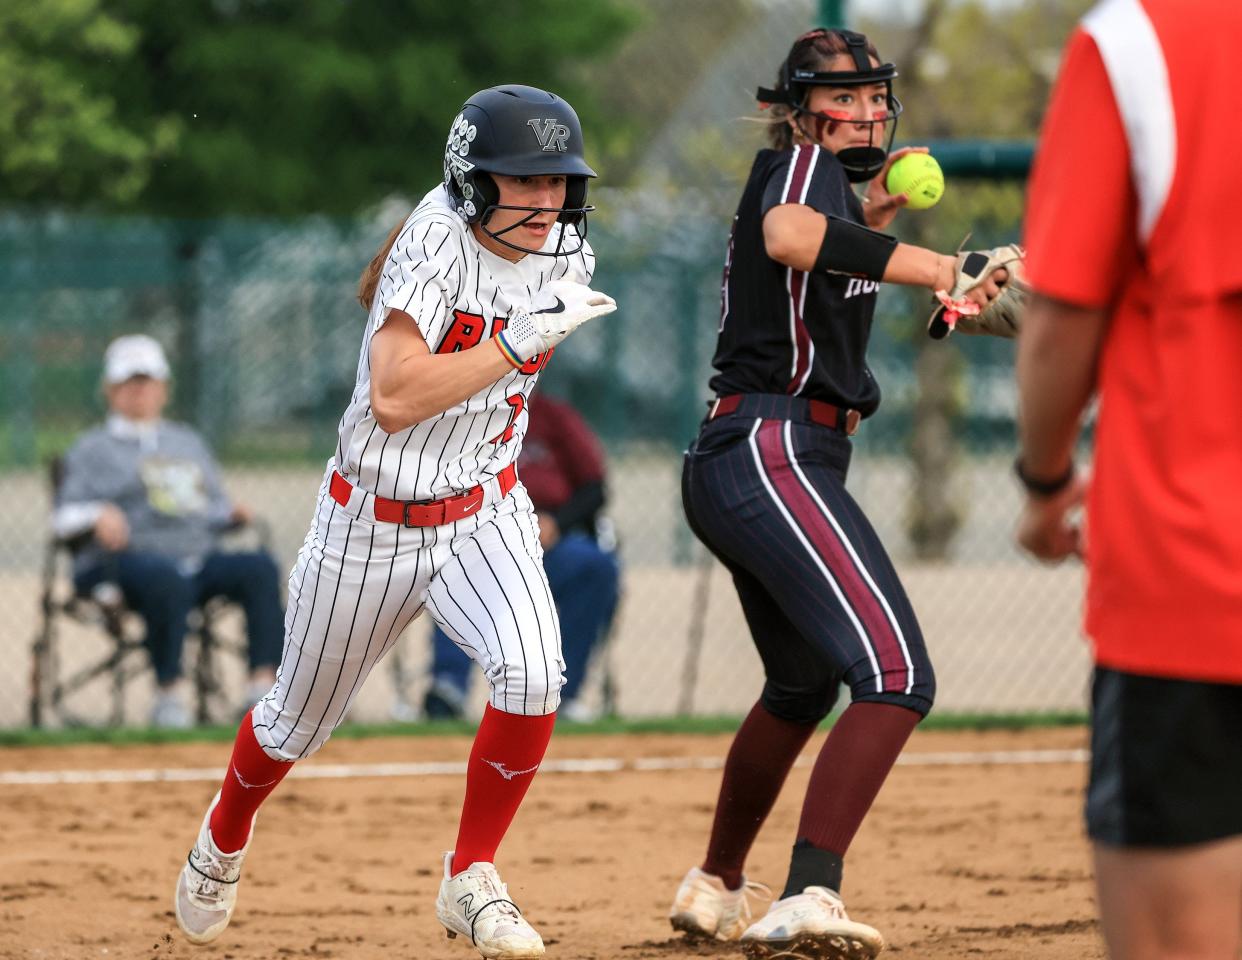 Vista Ridge's Reagan Pavesi tries to beat out Round Rock pitcher Maddy Azua's throw to first base on a bunt play during their March 22 game. The Dragons won that game 1-0, but the Rangers closed out District 25-6A play with a 1-0 win over the Dragons last Friday, Round Rock's first district loss of the season.